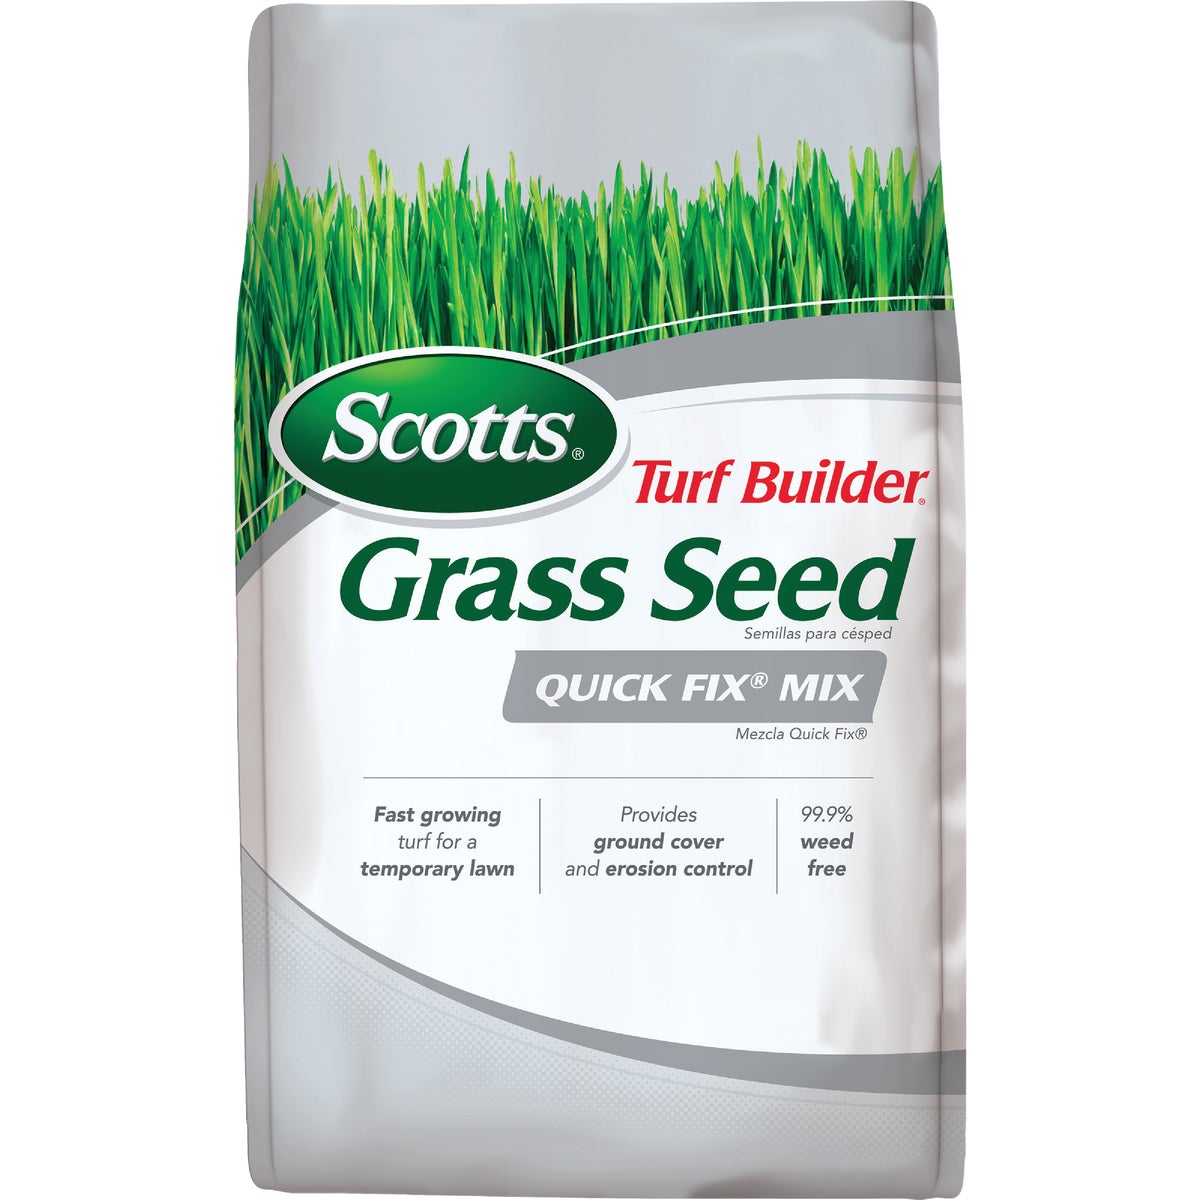 Item 714704, Scotts Turf Builder Quick Fix Mix grass seed is a fast way to cover bare 